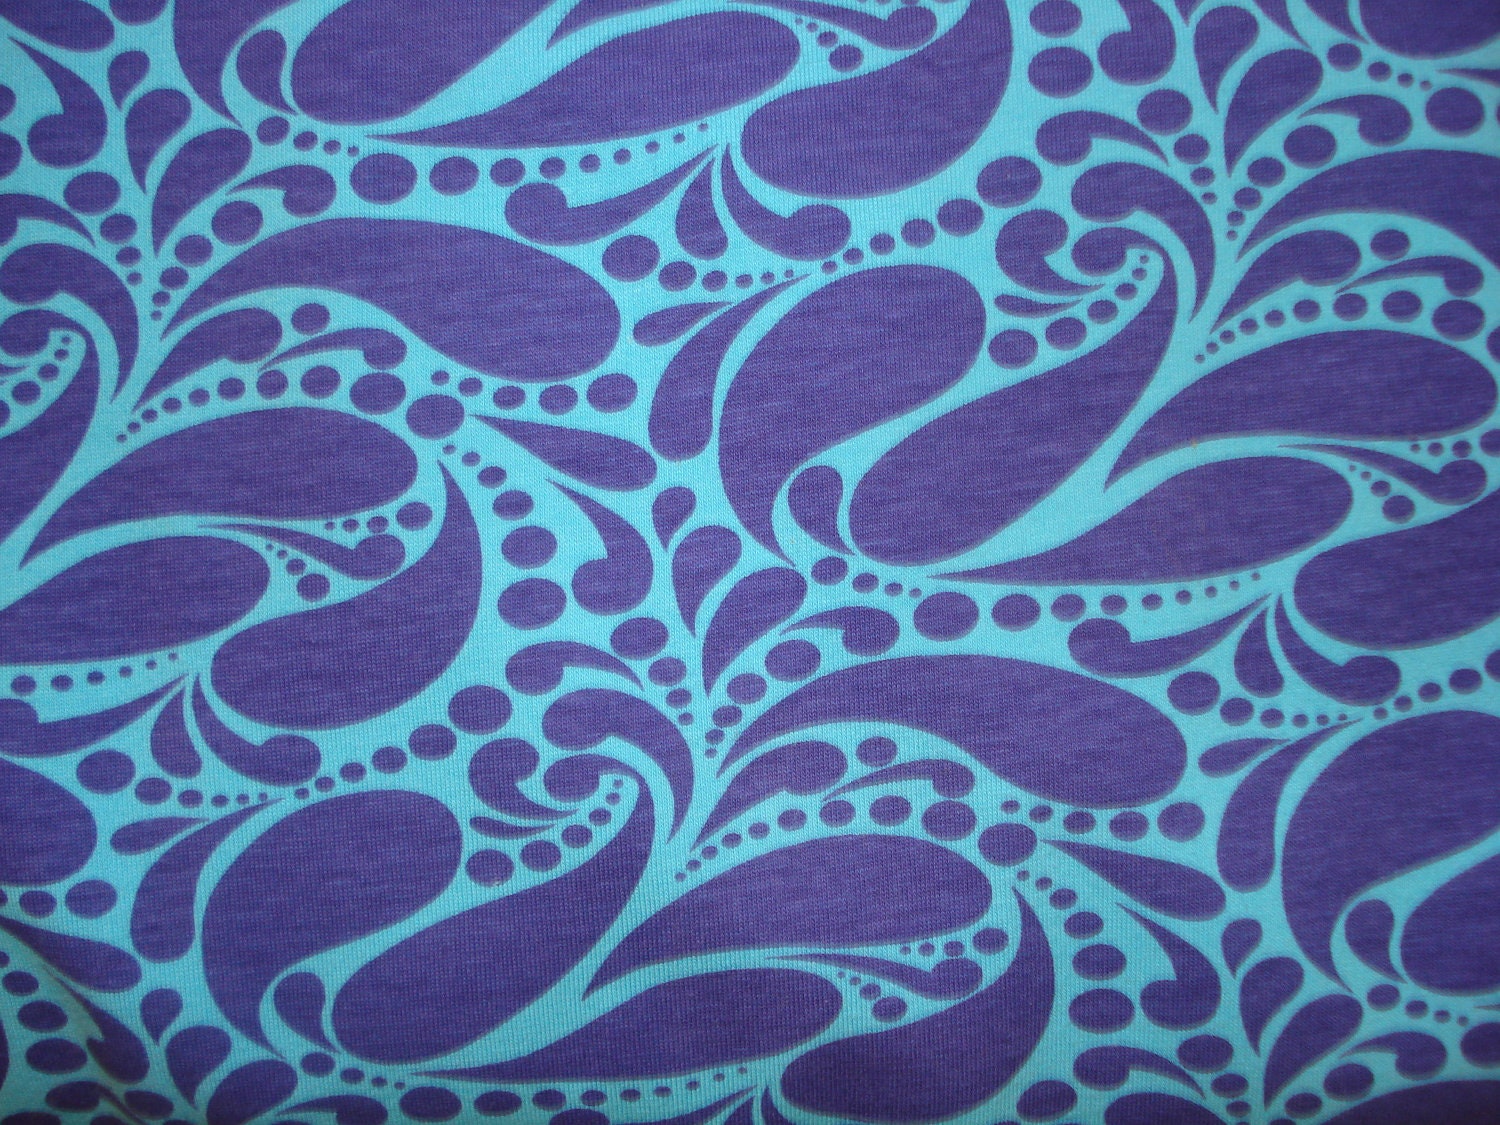 Purple paisley on turquoise Cotton Lycra knit fabric 1 YD